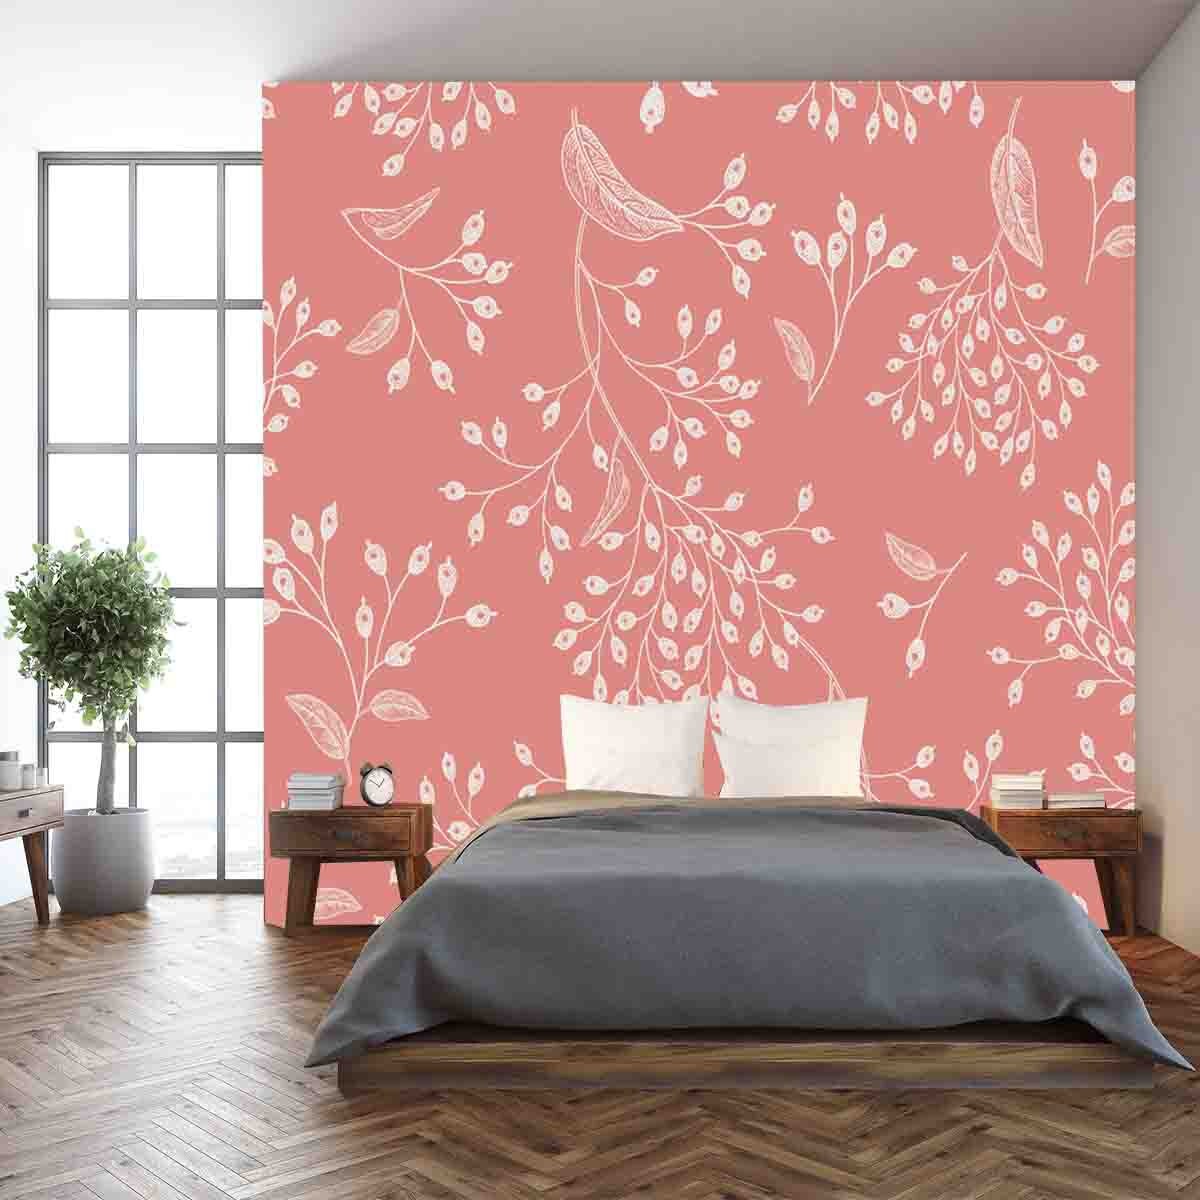 Oriental Style Pink and White Floral Vintage Wallpaper Bedroom Mural